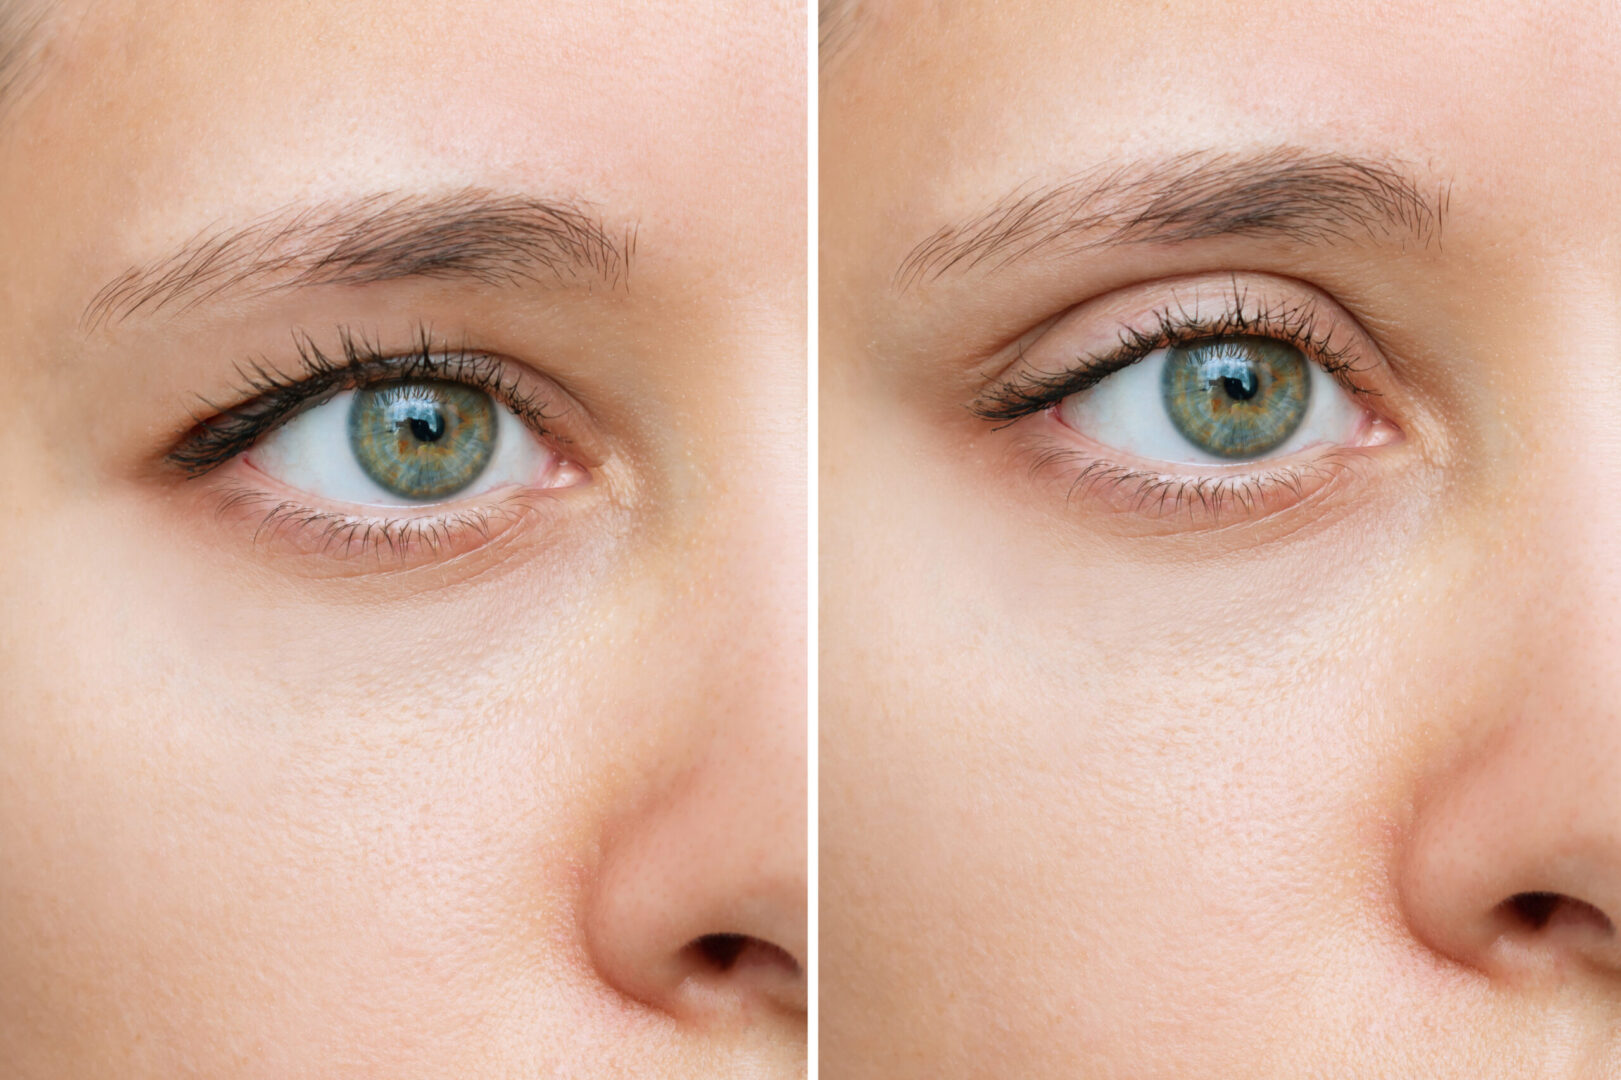 Blepharoplasty enhances the appearance of your eyes by treating facial issues with Aspire Surgical in Salt Lake City, UT